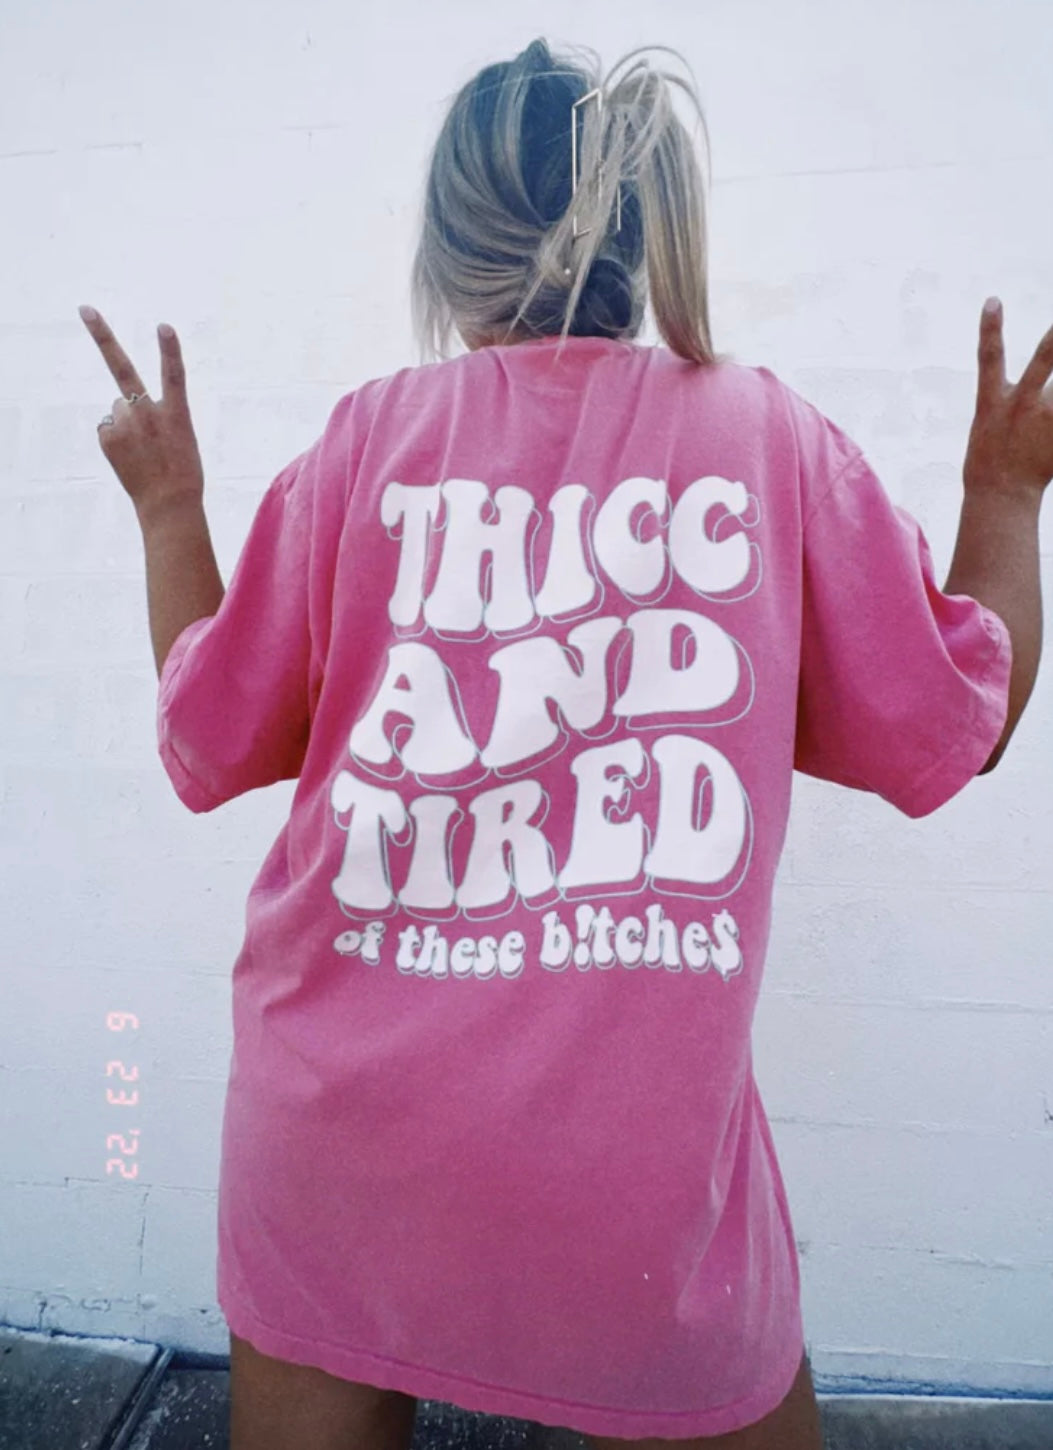 Thicc and Tired of These B!tche$ Graphic Tee